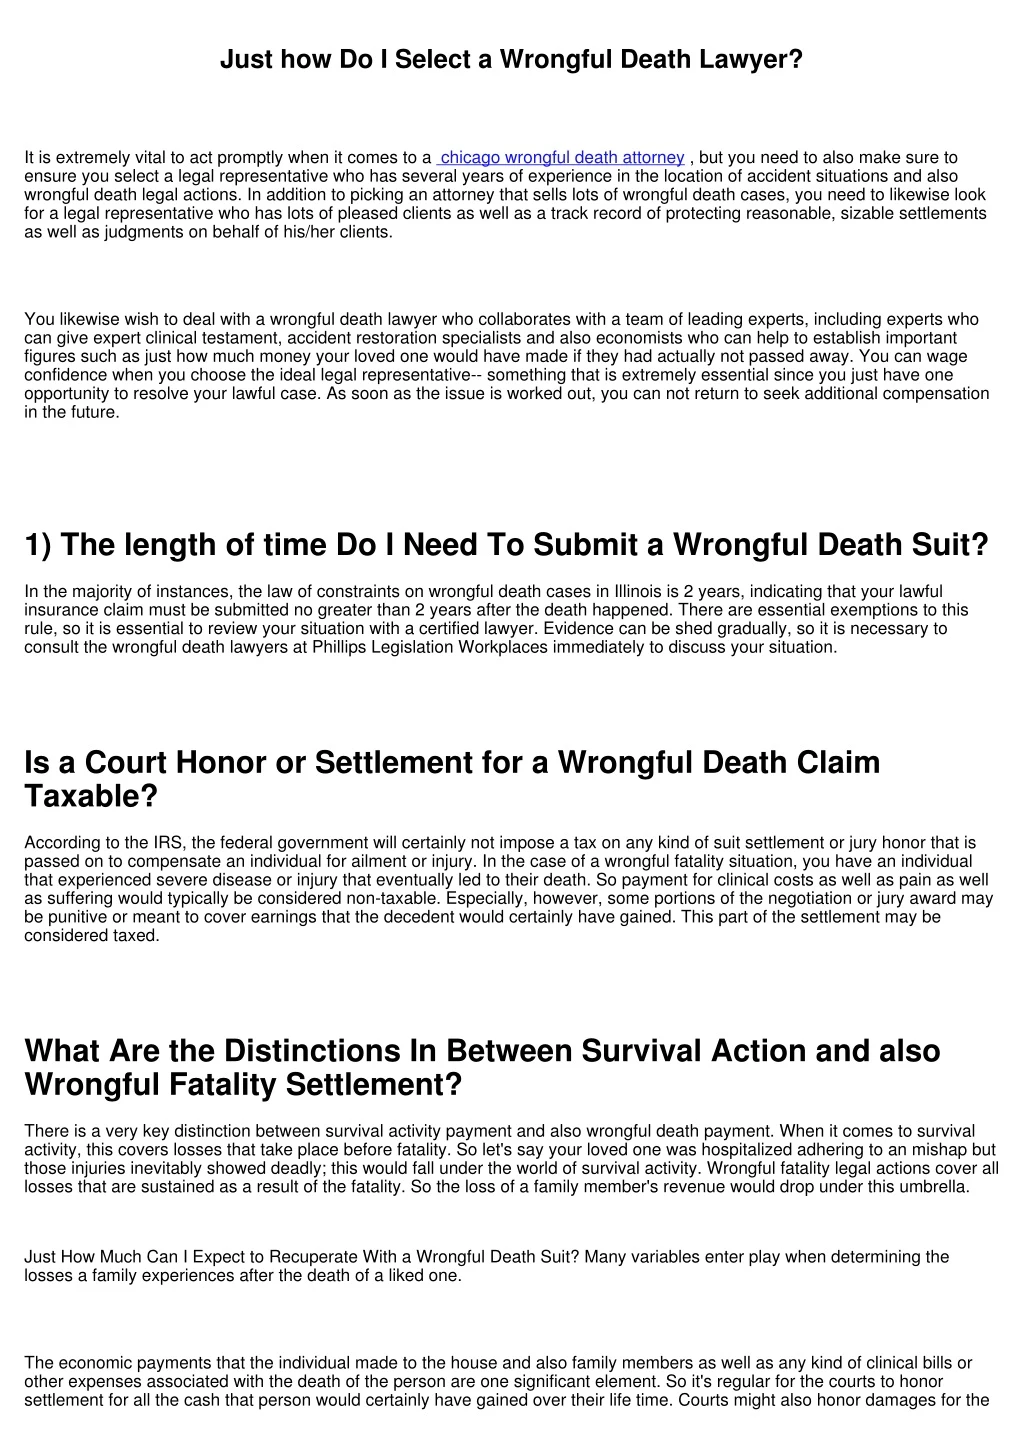 just how do i select a wrongful death lawyer